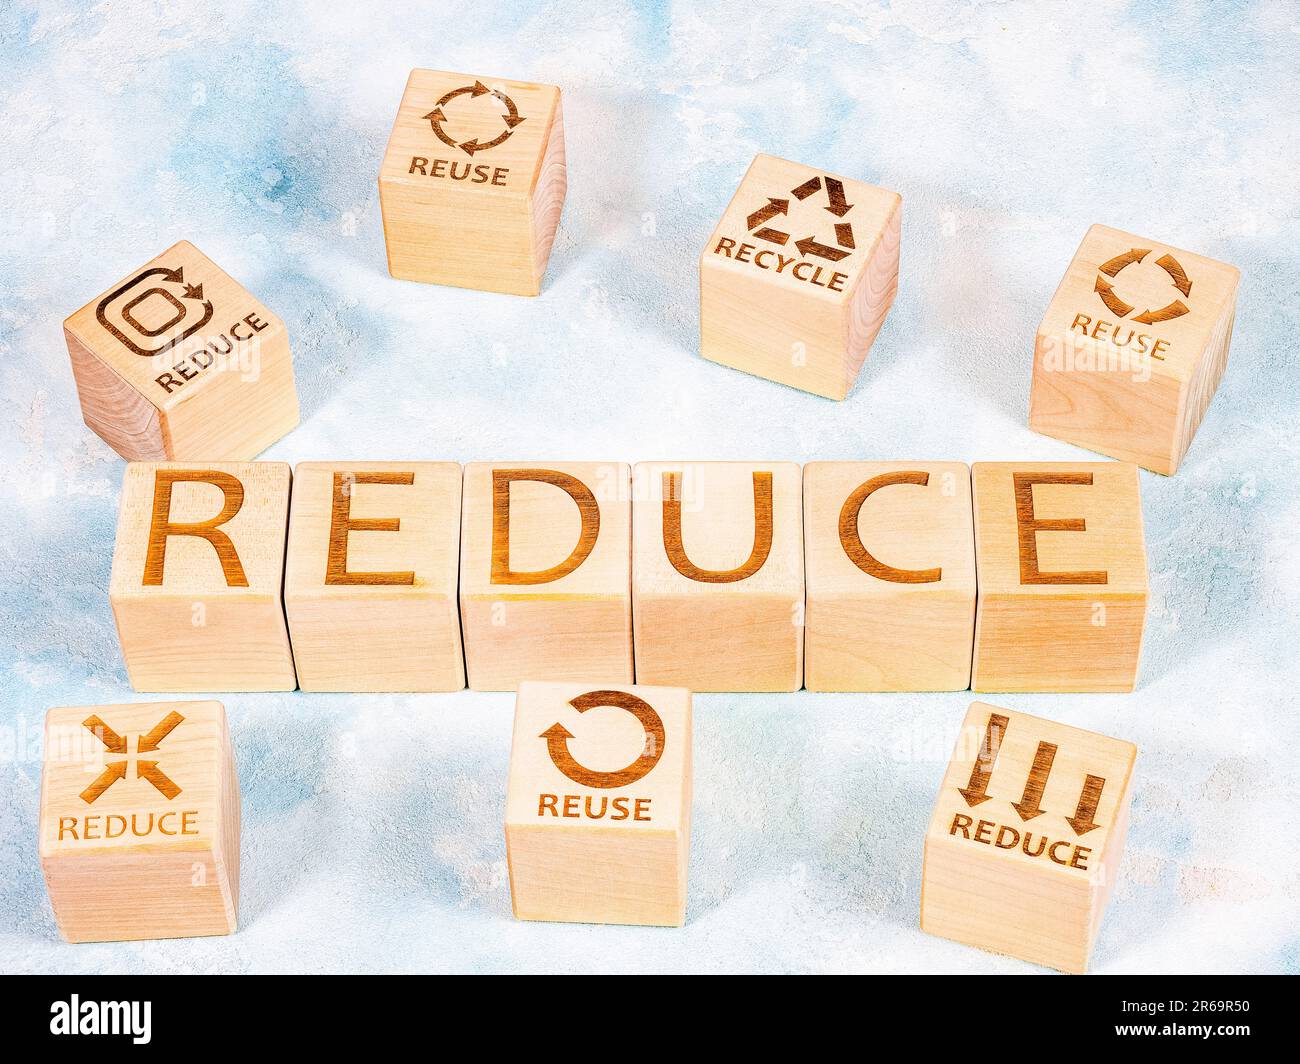 Text REDUCE as resources consumption concept Stock Photo